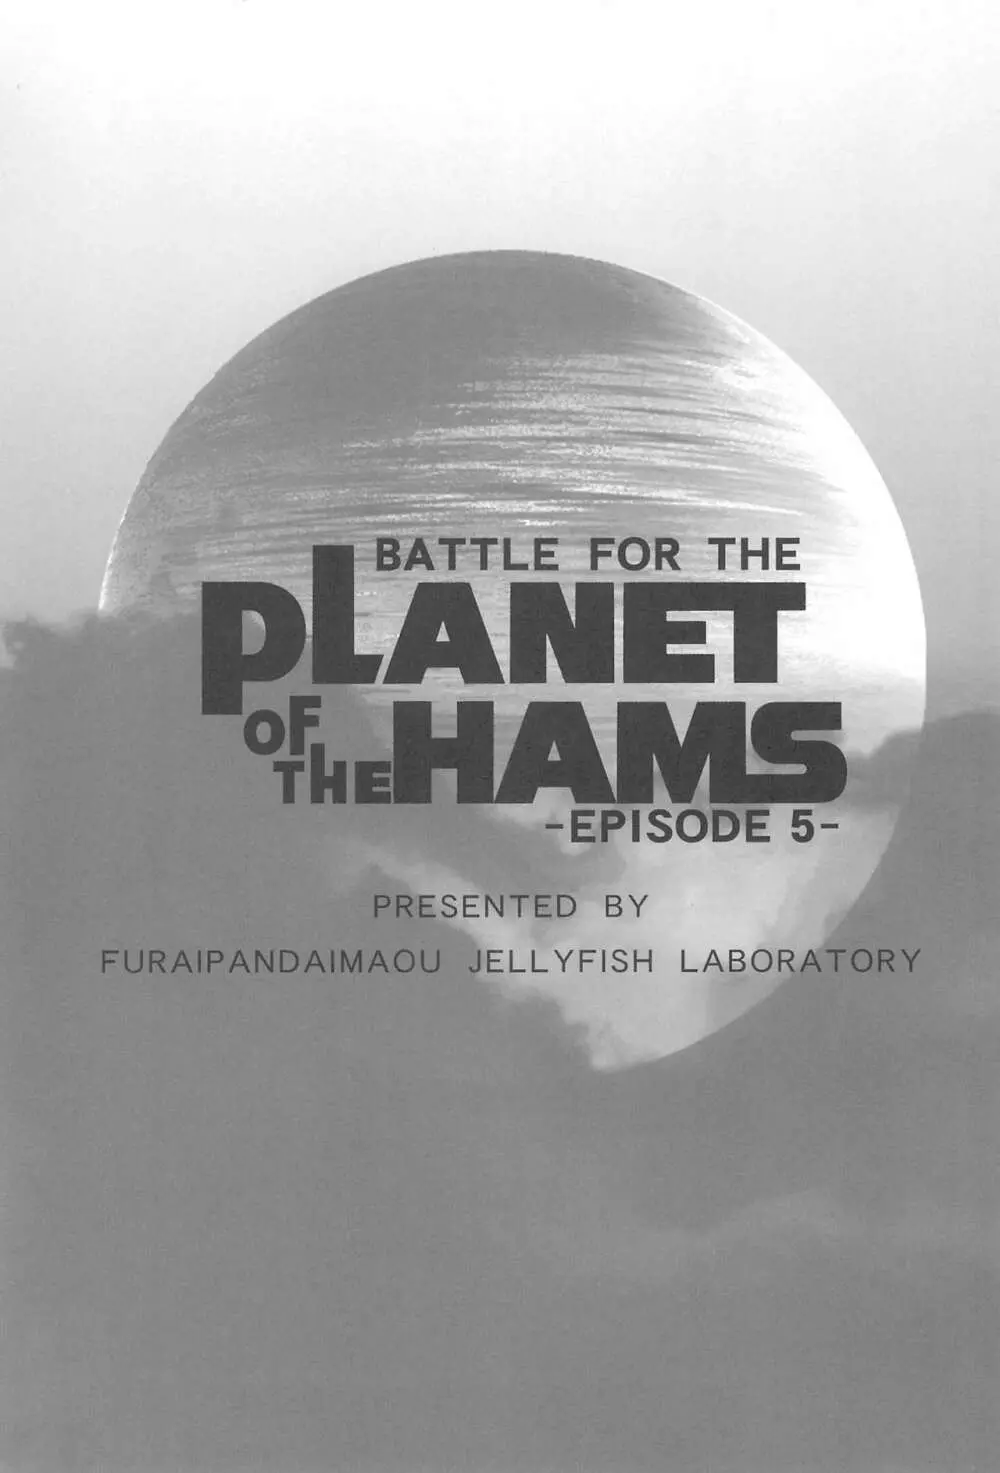 BATTLE FOR THE PLANET OF THE HAMS -EPISODE 5- 3ページ